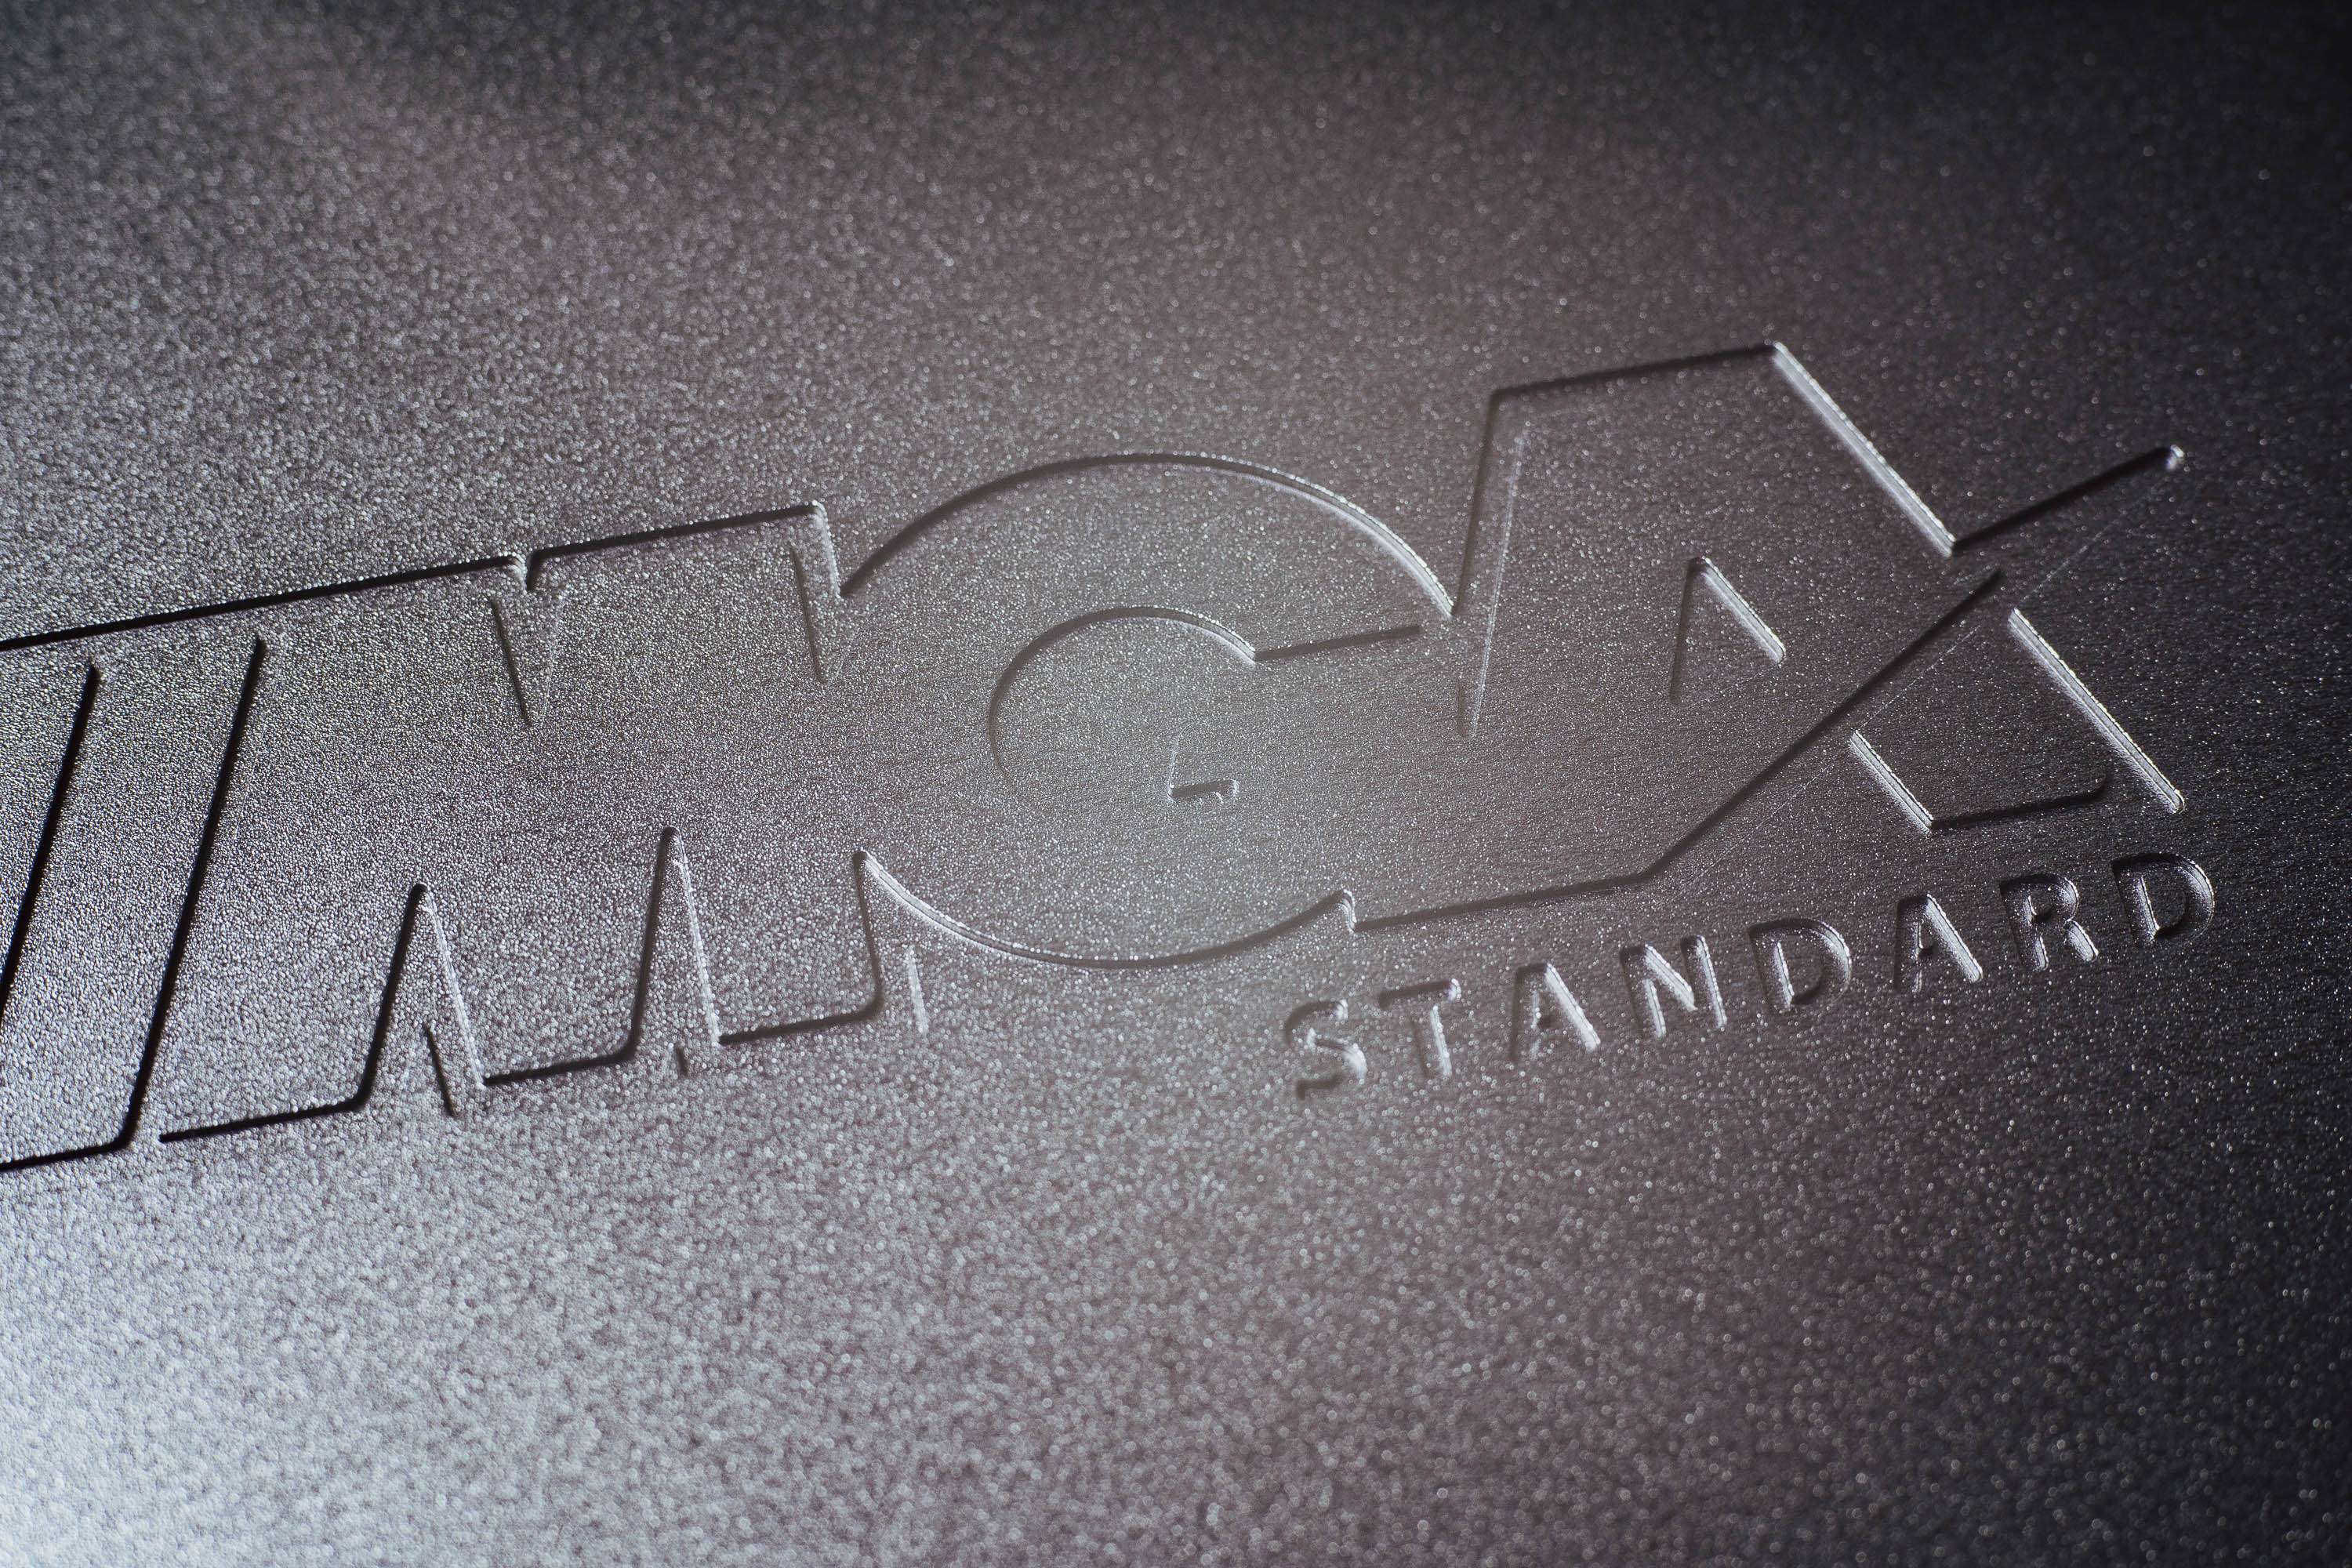 Logo on the back of the case